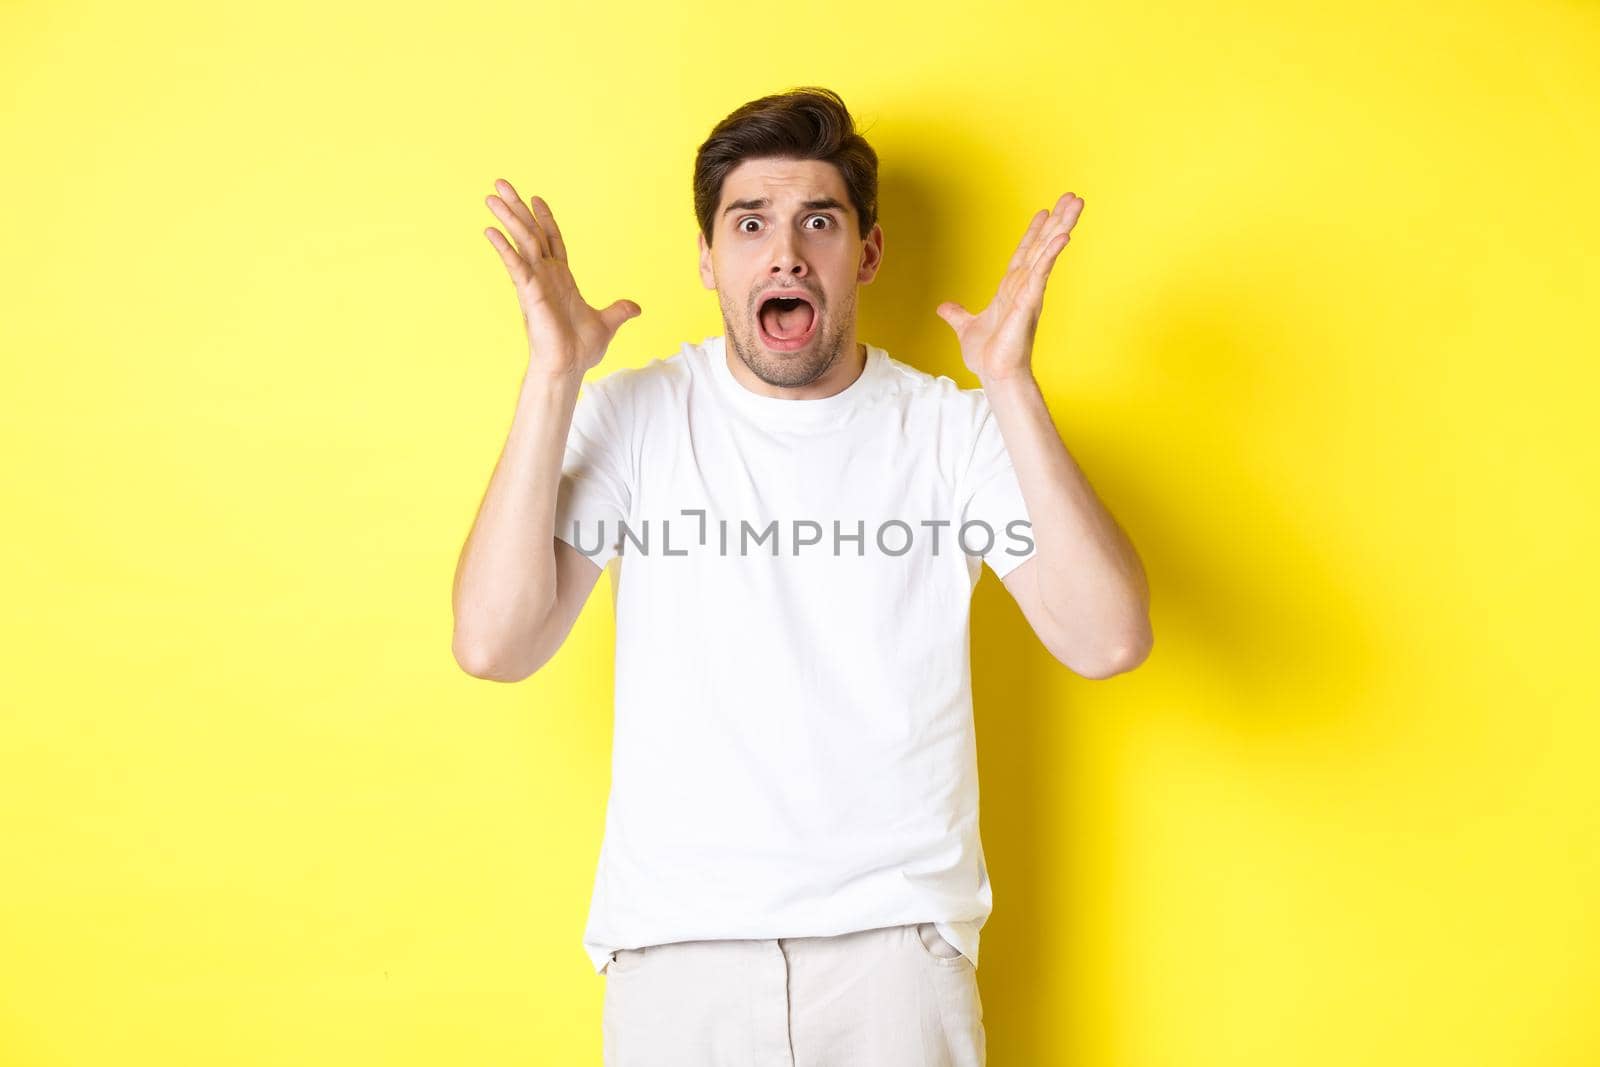 Frustrated and shocked guy panicking, screaming and looking scared, standing in white t-shirt over yellow background.